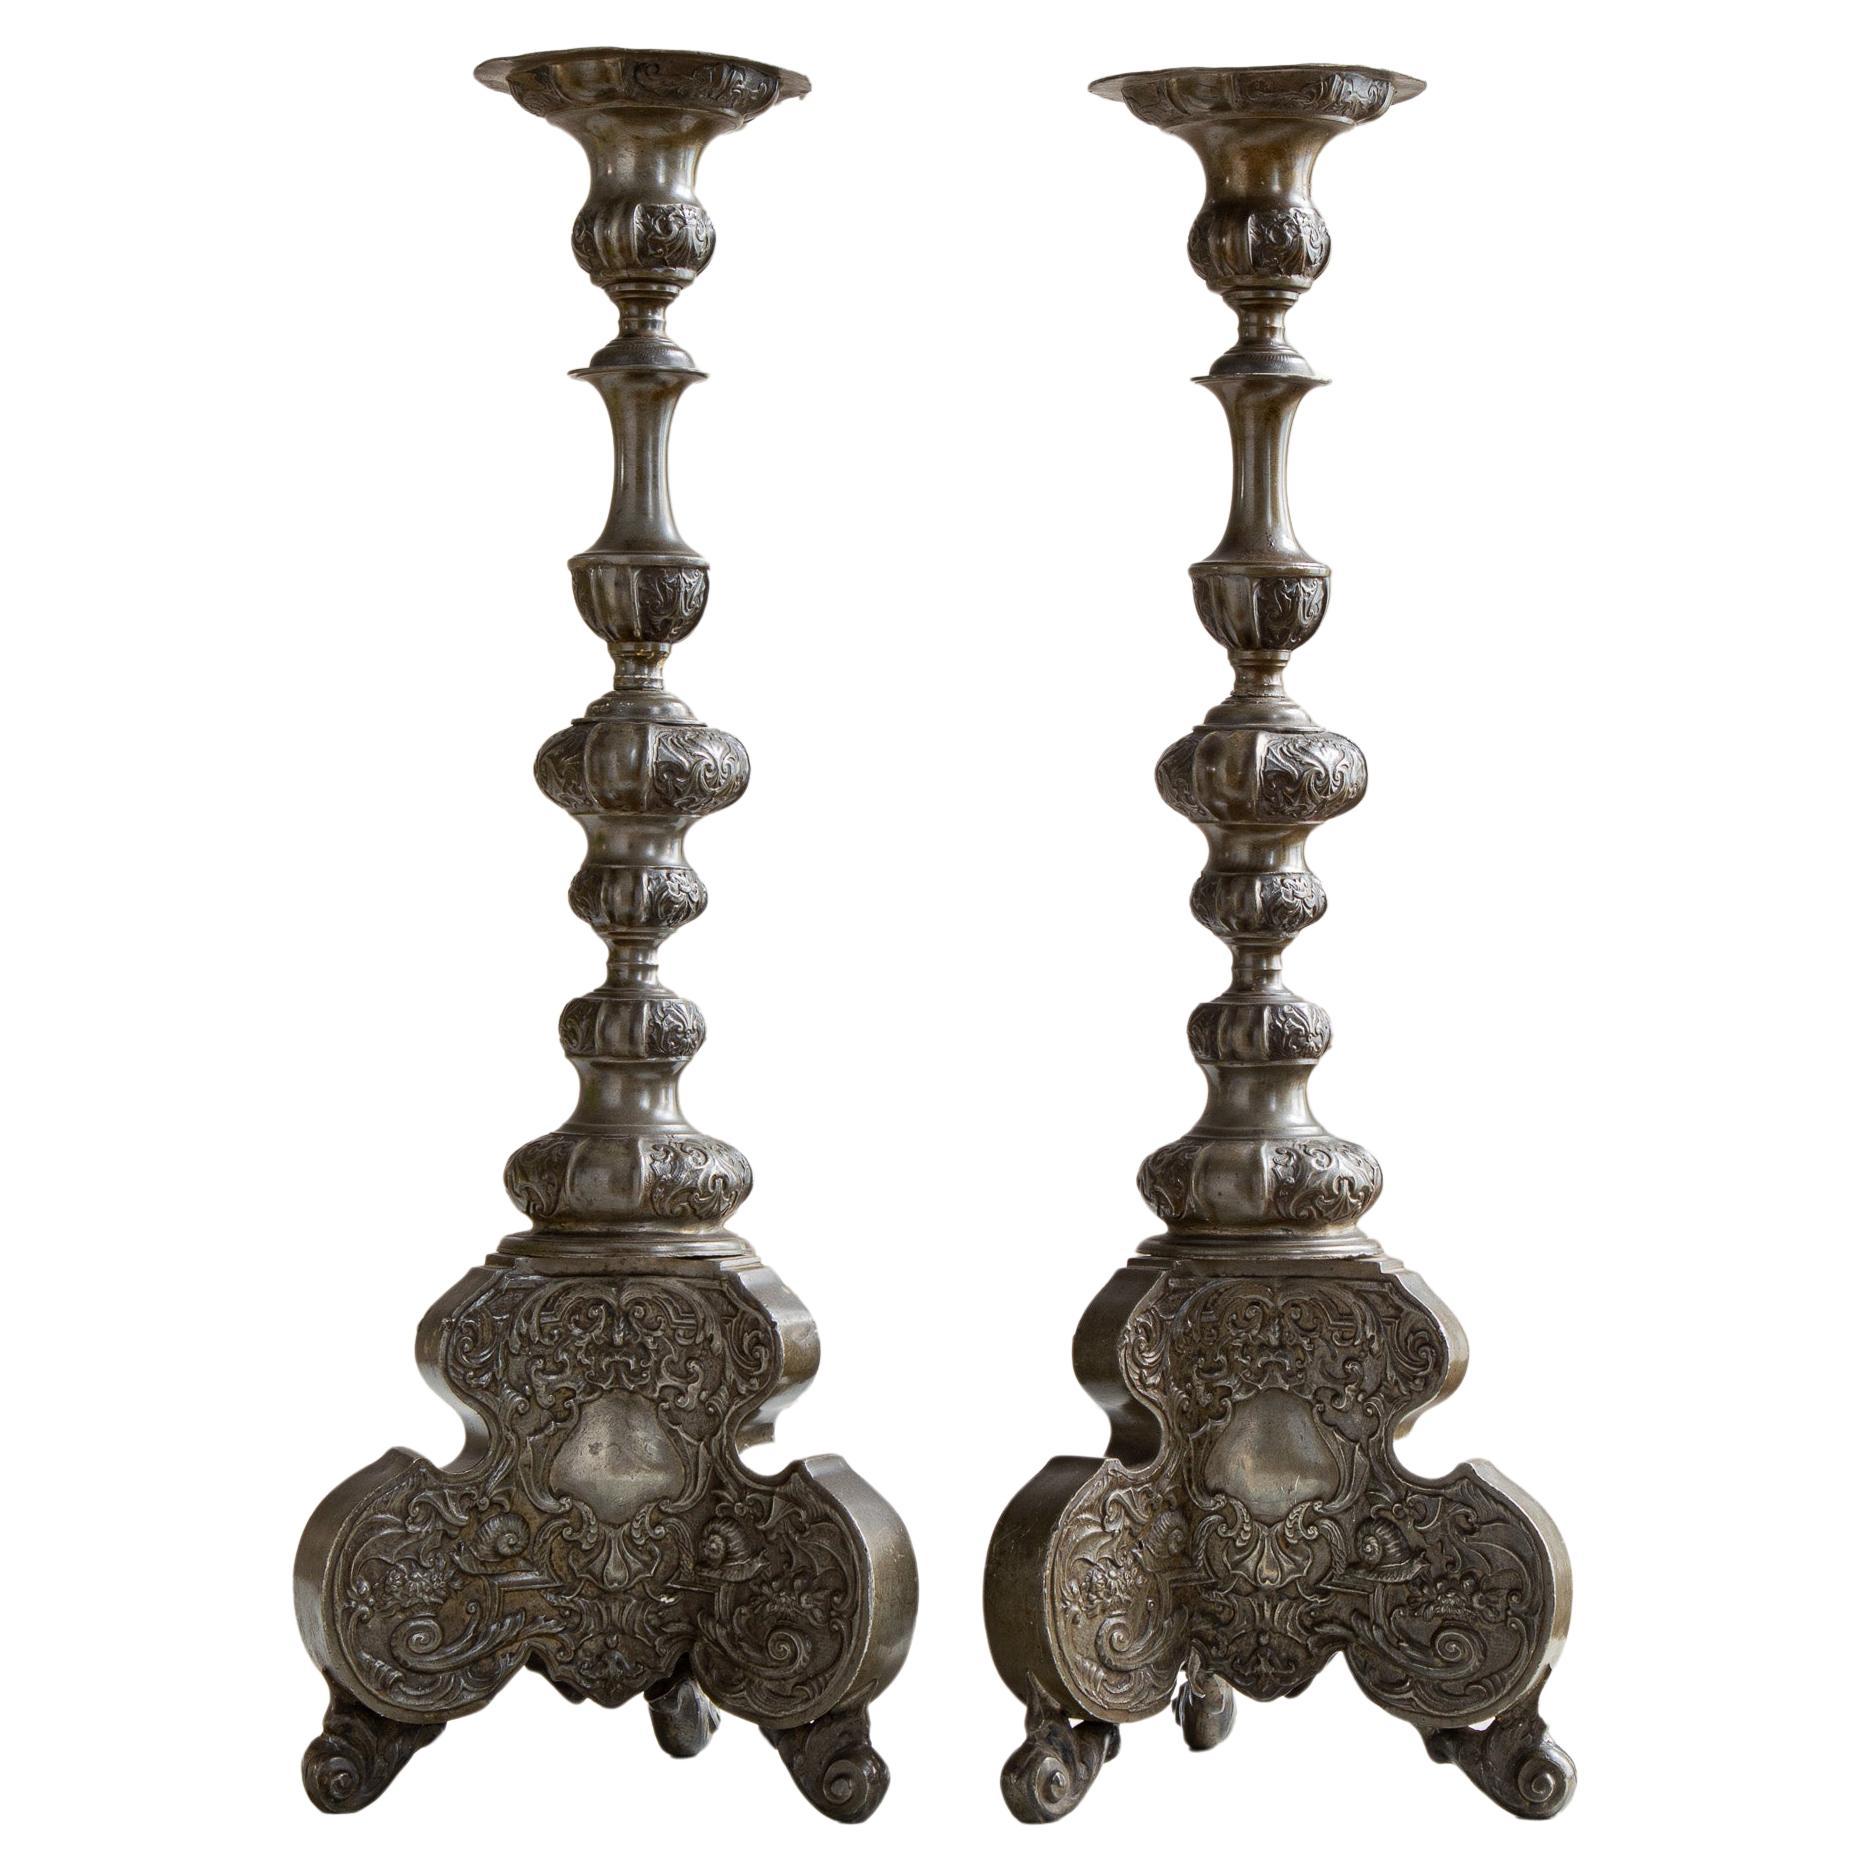 19th Century Renaissance Style Pewter Candle Holders From Towie Barclay Castle For Sale